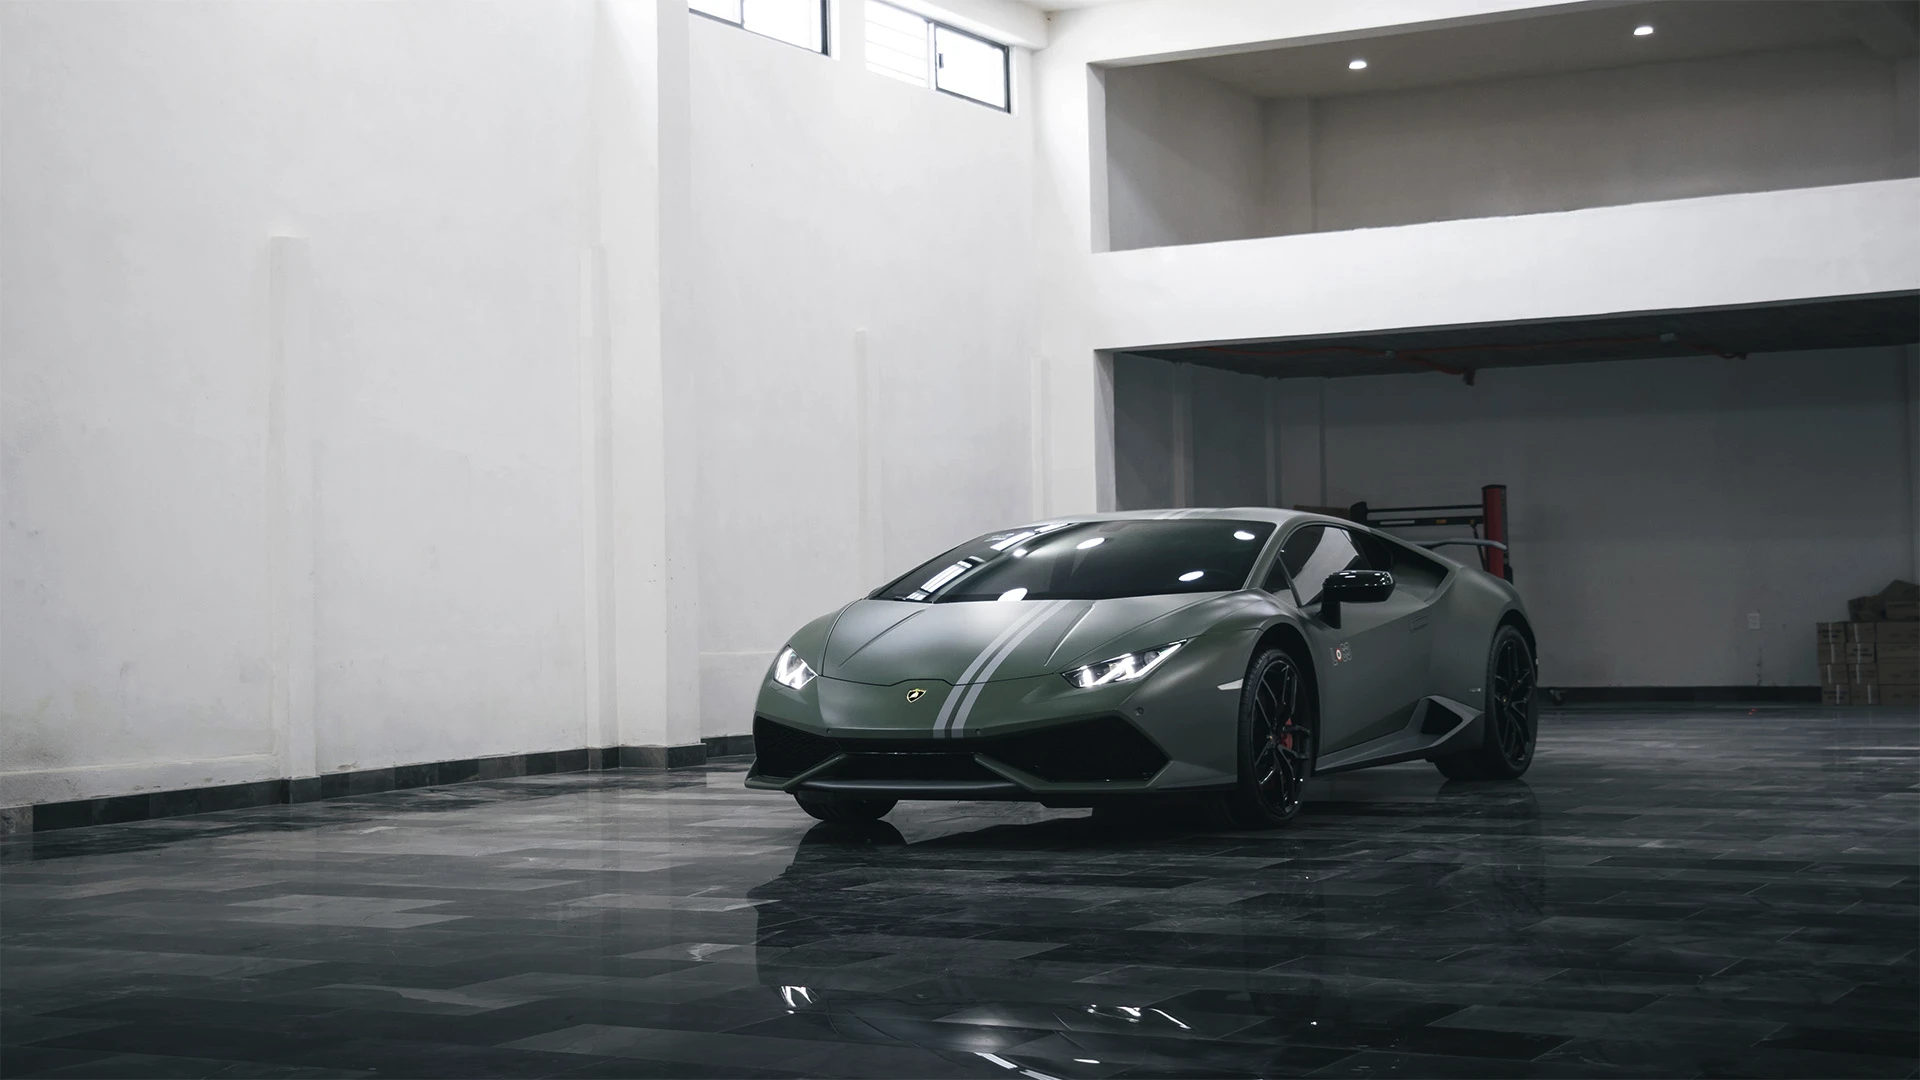 Green Lamborghini, with two white stripes, parked in a garage